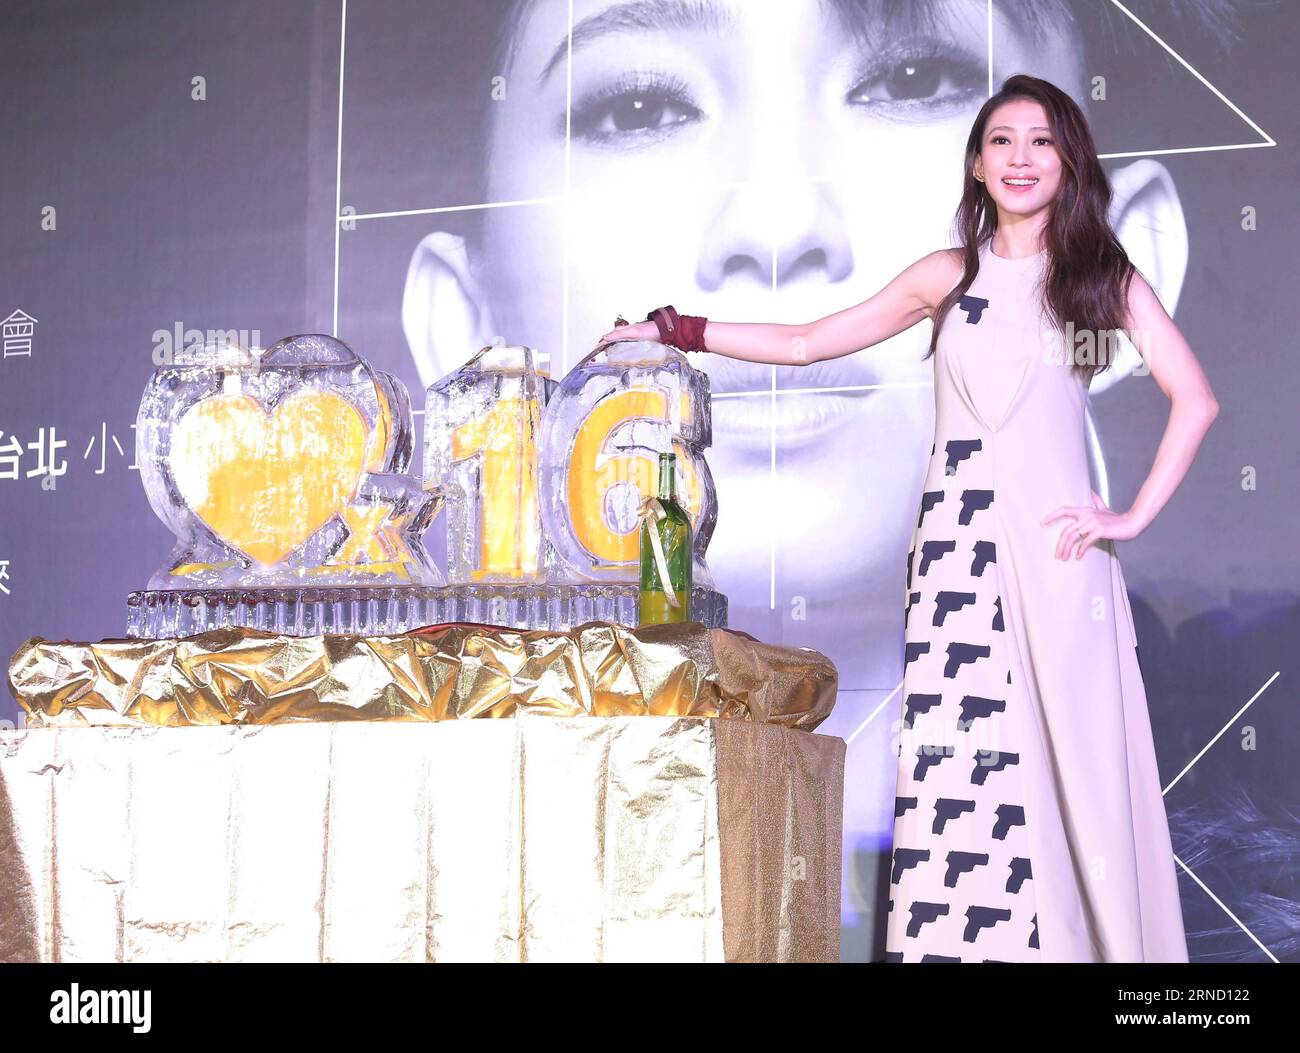 (160427) -- TAIPEI, April 27, 2016 () -- Singer Penny Tai attends a press conference of her world tour Zei in Taipei, southeast China s Taiwan, April 27, 2016. The concert in Taipei is expected to be held on Aug. 13. () (mp) CHINA-TAIPEI-PENNY TAI-CONCERT (CN) Xinhua PUBLICATIONxNOTxINxCHN   160427 Taipei April 27 2016 Singer Penny Tai Attends a Press Conference of her World Tour Character in Taipei South East China S TAIWAN April 27 2016 The Concert in Taipei IS expected to Be Hero ON Aug 13 MP China Taipei Penny Tai Concert CN XINHUA PUBLICATIONxNOTxINxCHN Stock Photo